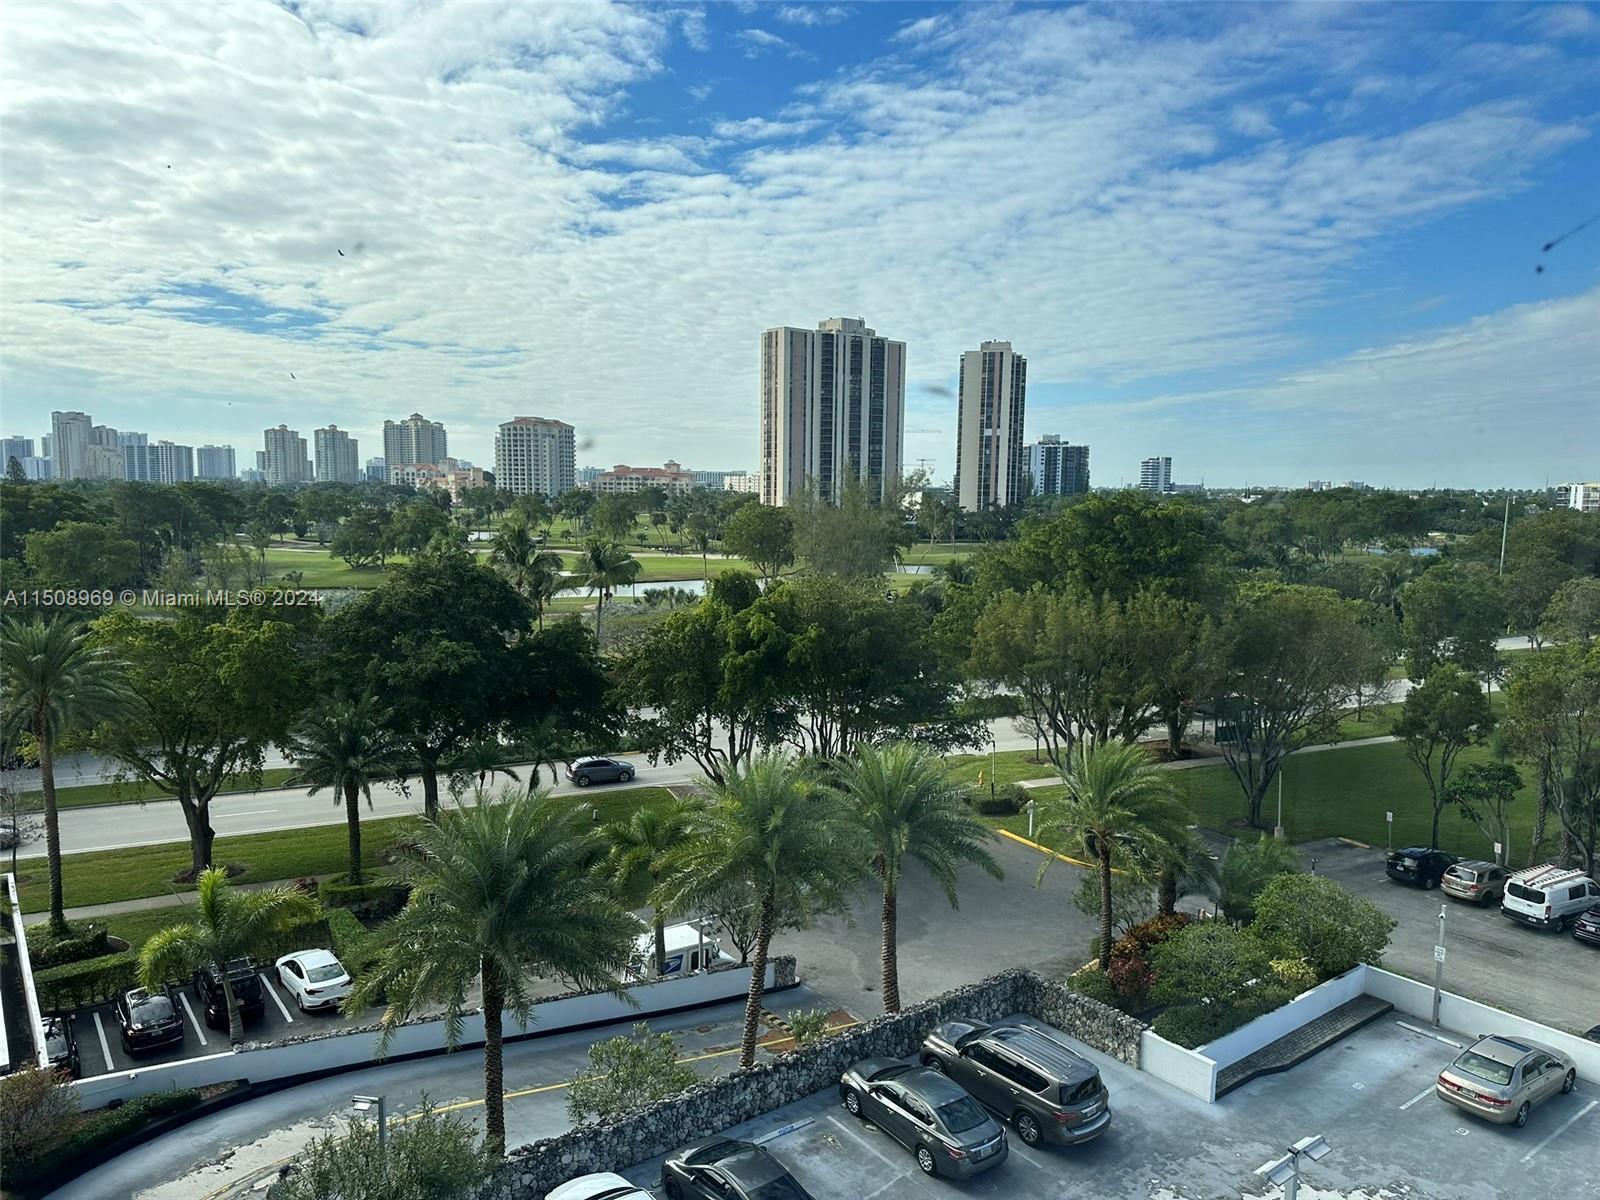 Photo of 3375 N Country Club Dr #609 in Aventura, FL